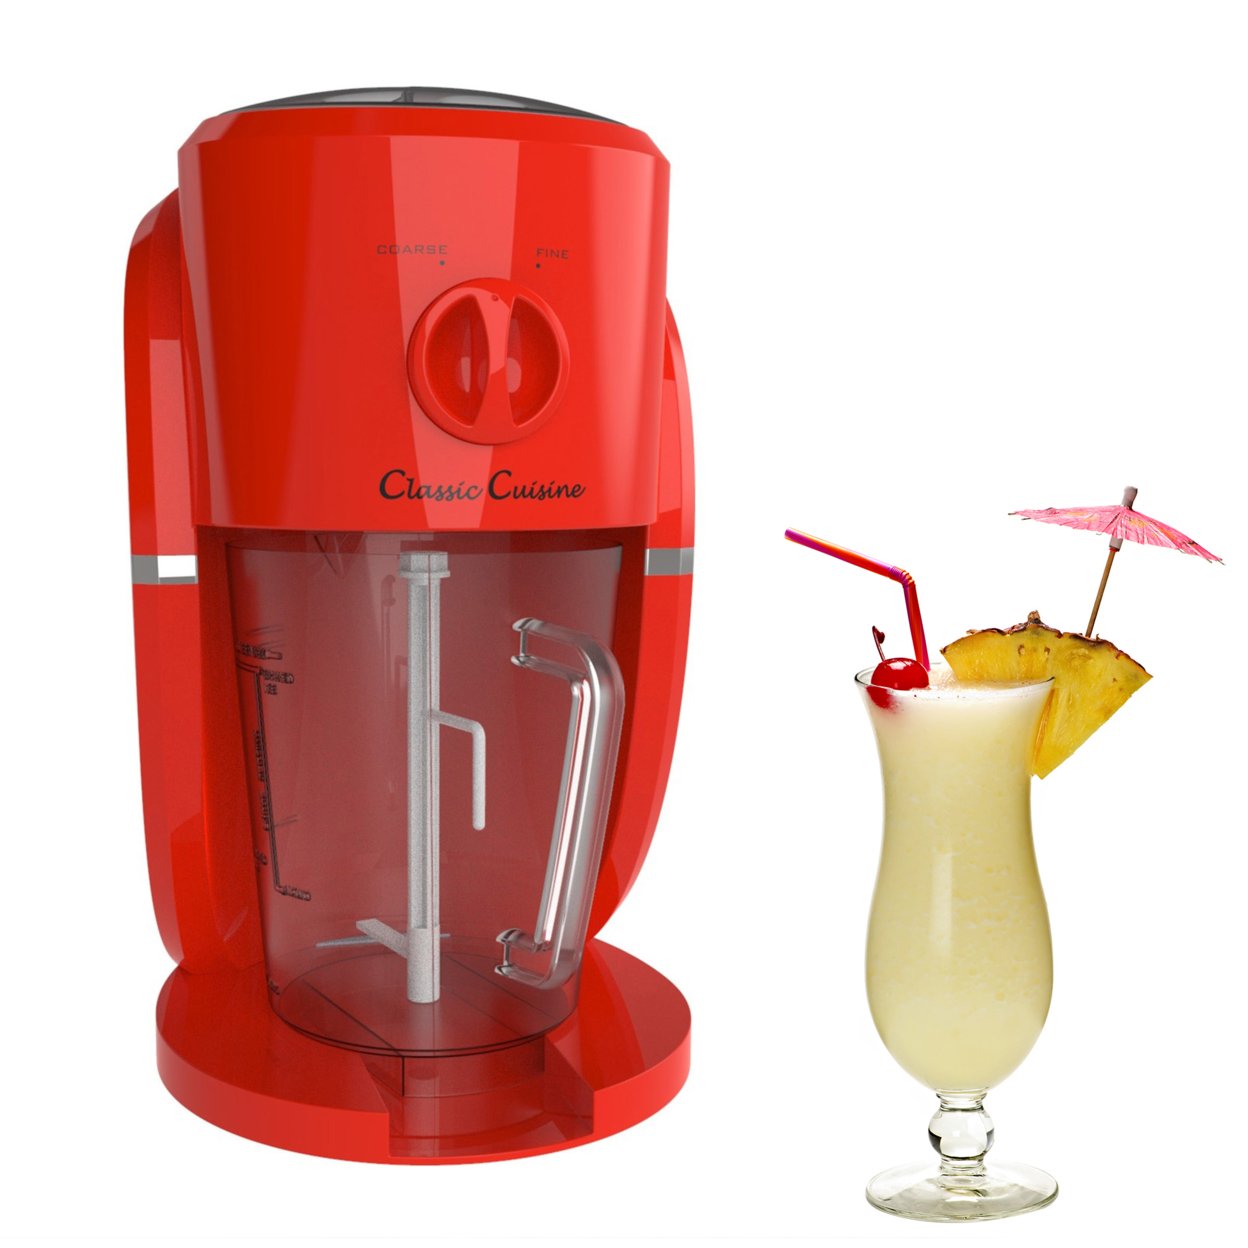 Classic Cuisine Frozen Drink Maker Mixer and Ice Crusher Machine for Margaritas Pina Coladas Daiquiris Shaved Ice Treats Pitcher